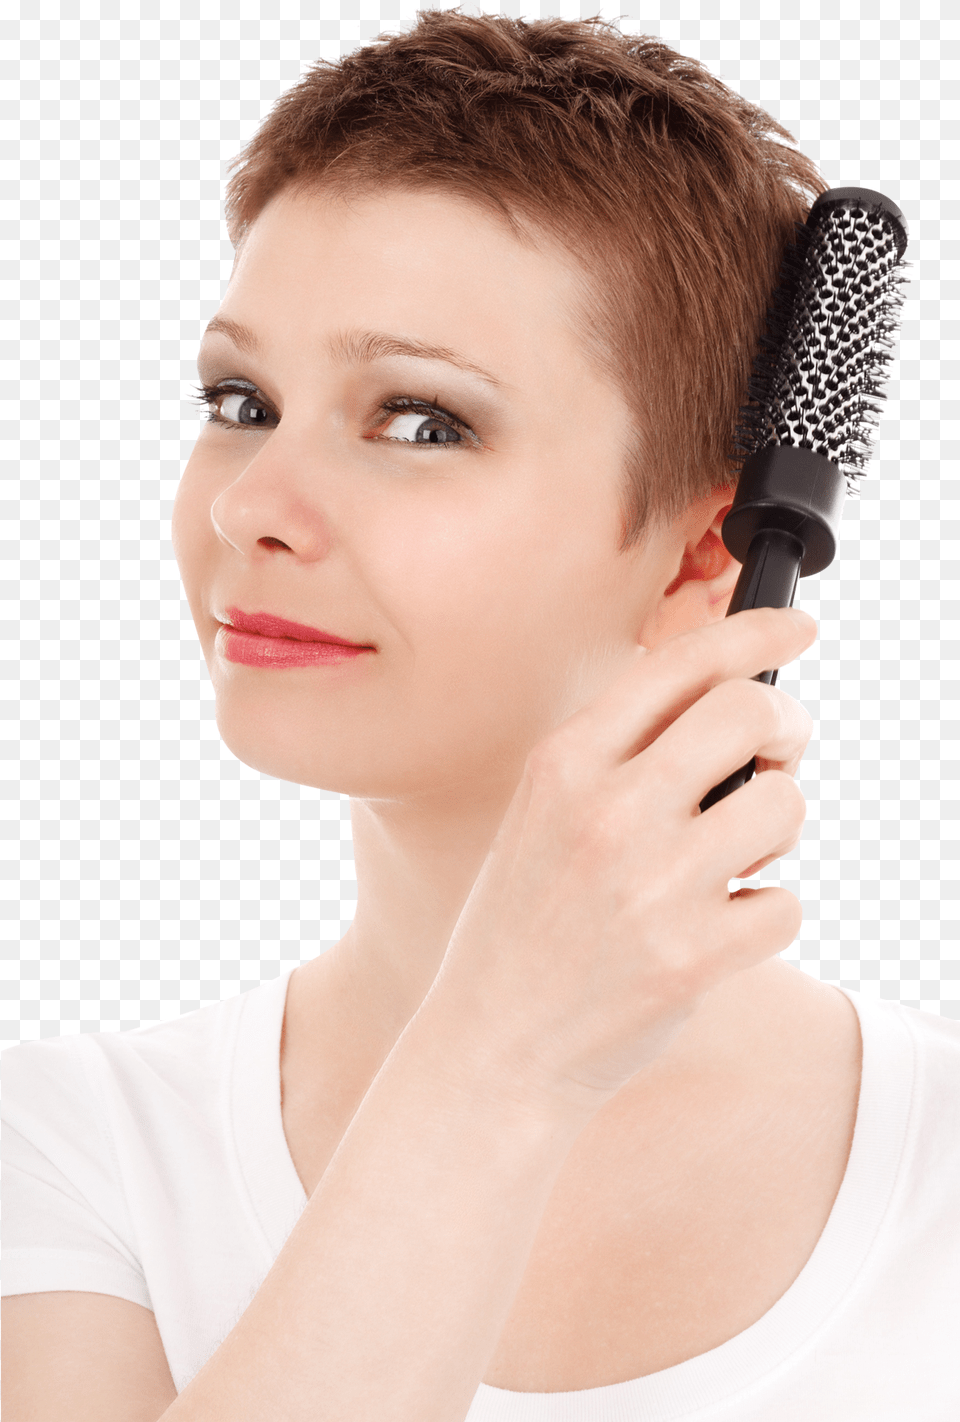 Woman Combing Her Hair Image Pngpix Girl Brushing Her Hair, Adult, Female, Person, Face Free Png